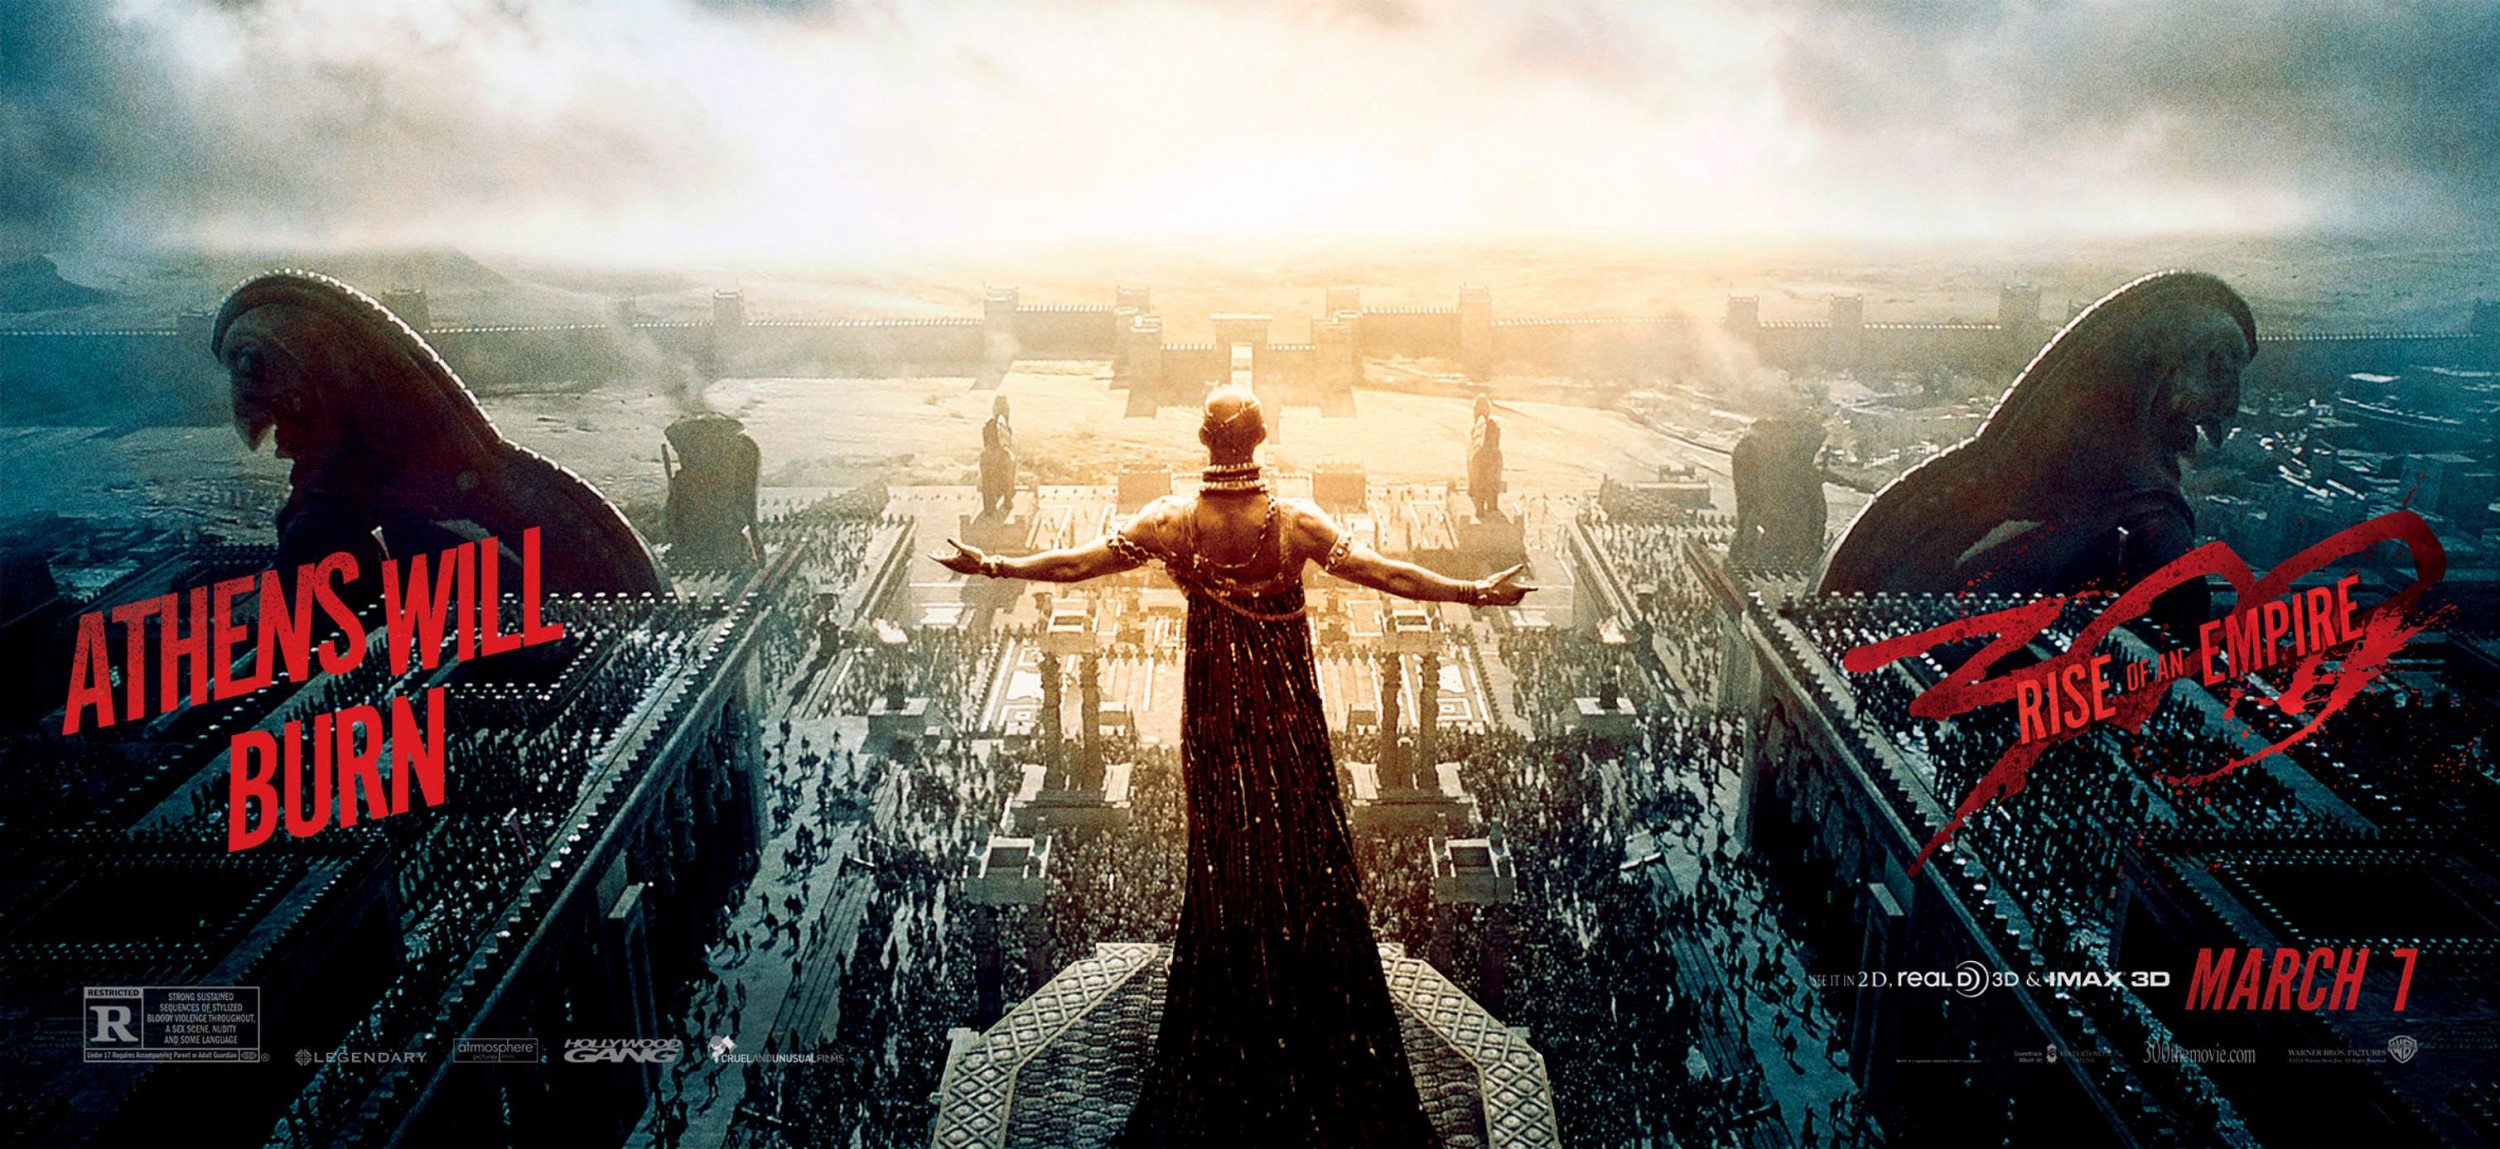 Mega Sized Movie Poster Image for 300: Rise of an Empire (#16 of 20)